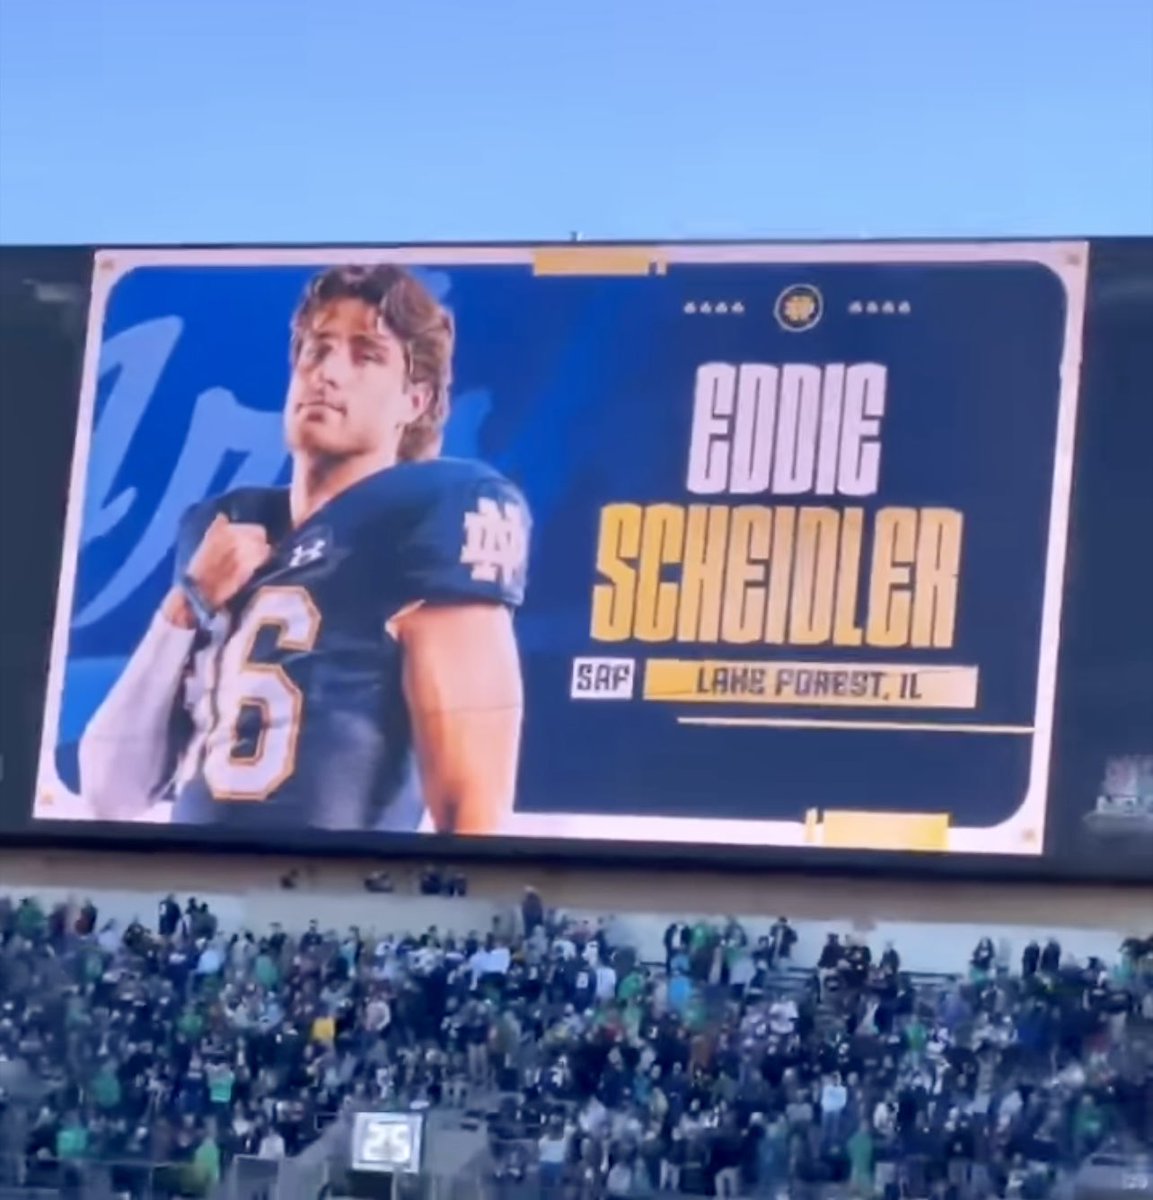 Congrats to my nephew ⁦@eddie_scheidler⁩ who has proven dreams come true. ⁦@NDFootball⁩ was lucky to have you these past few years. You represented yourself,your family, and your school like the golden-domed champion that you are. ⁦@NotreDame⁩ ⁦@NCAA⁩